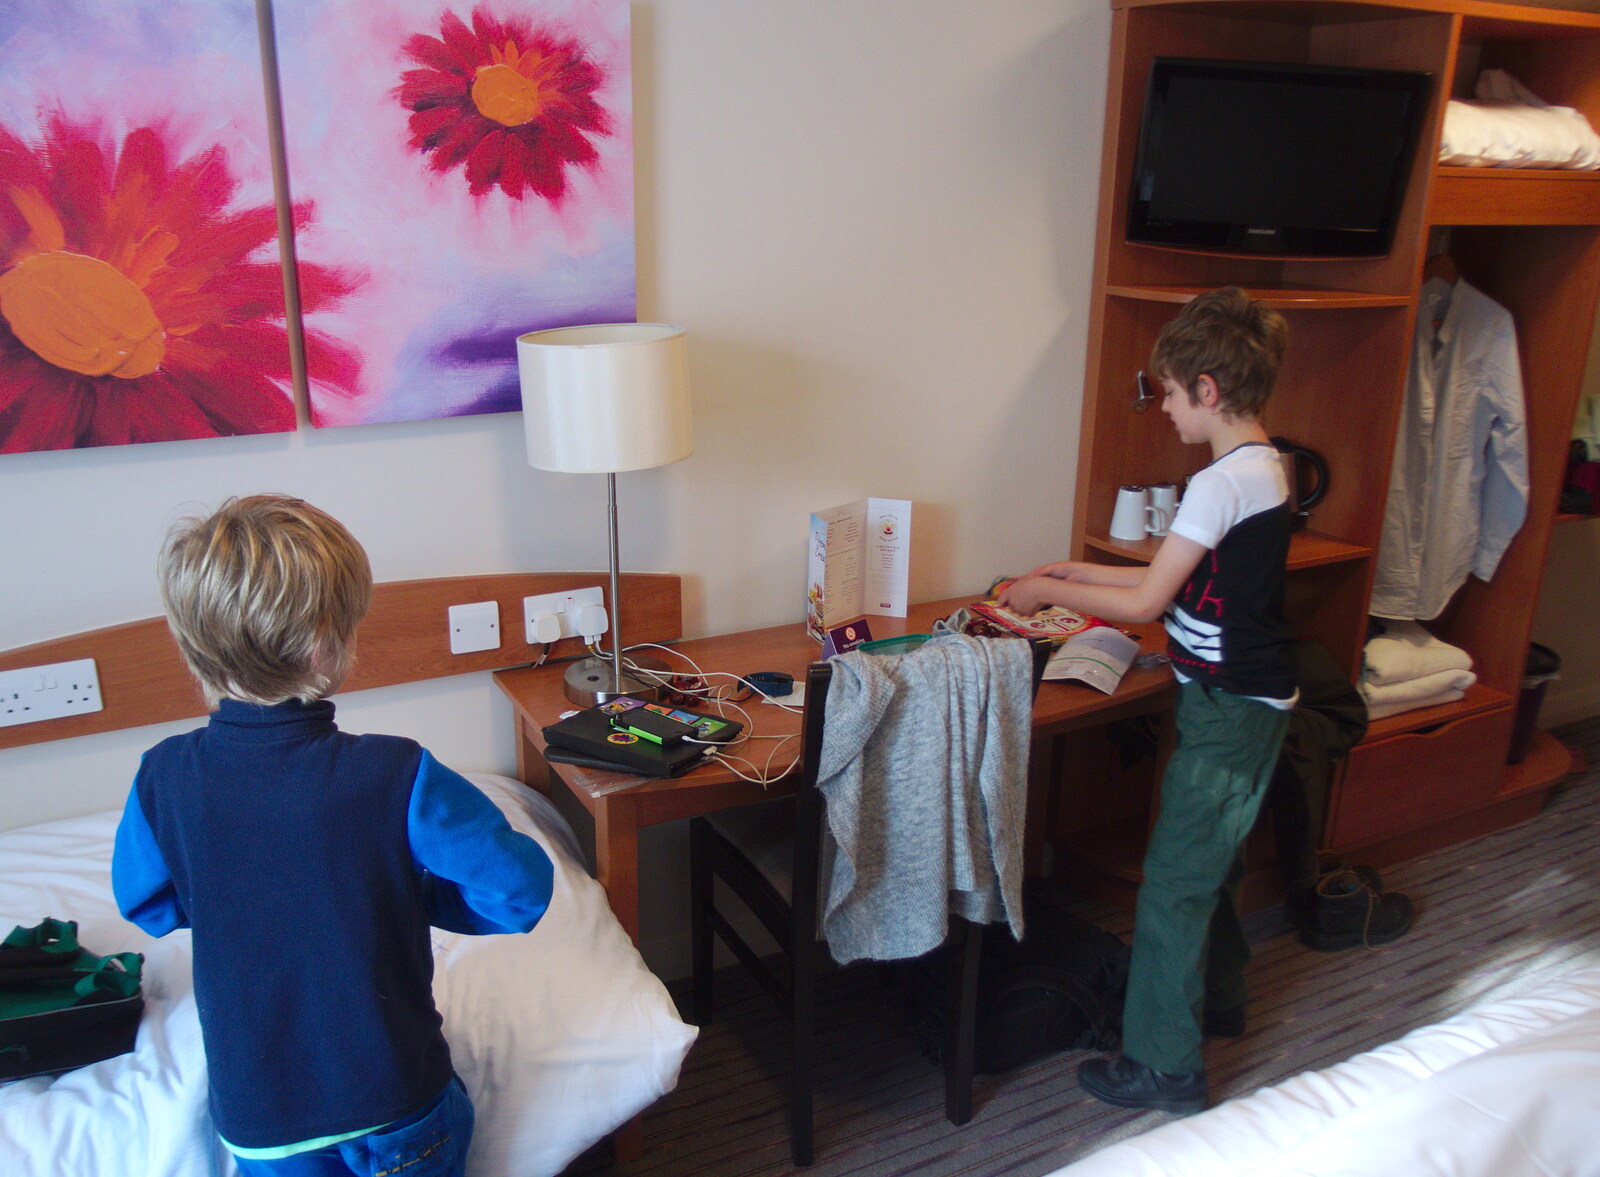 The boys in the Premier Inn bedroom from A Trip to the South Coast, Highcliffe, Dorset - 20th September 2019